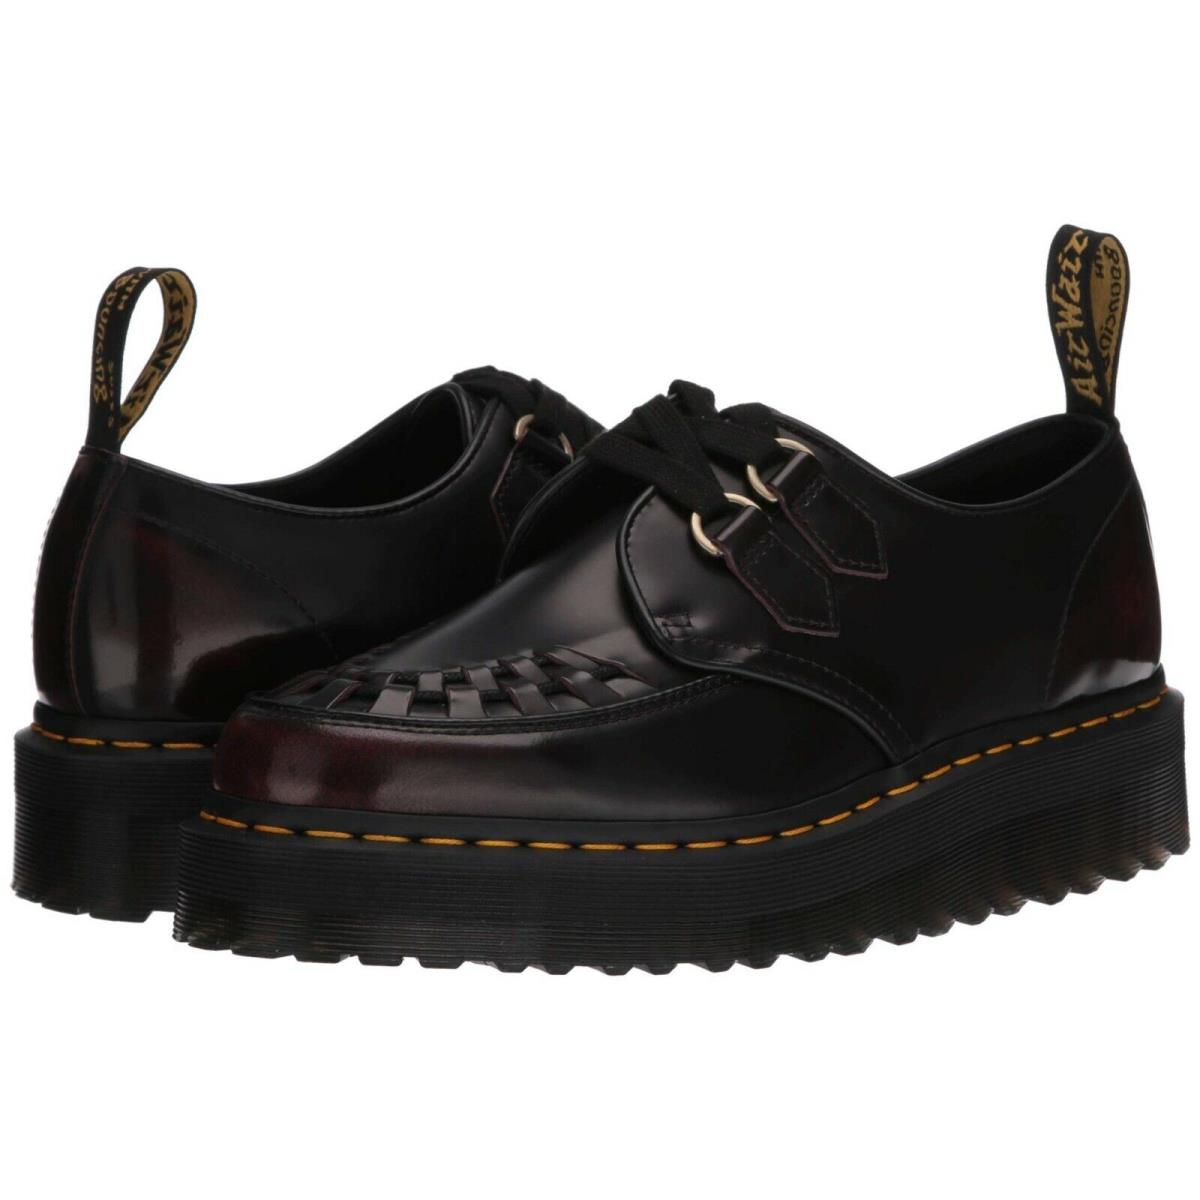 Unisex Shoes Dr. Martens Sidney Quad Creepers Leather Oxfords 25742600 Arcadia